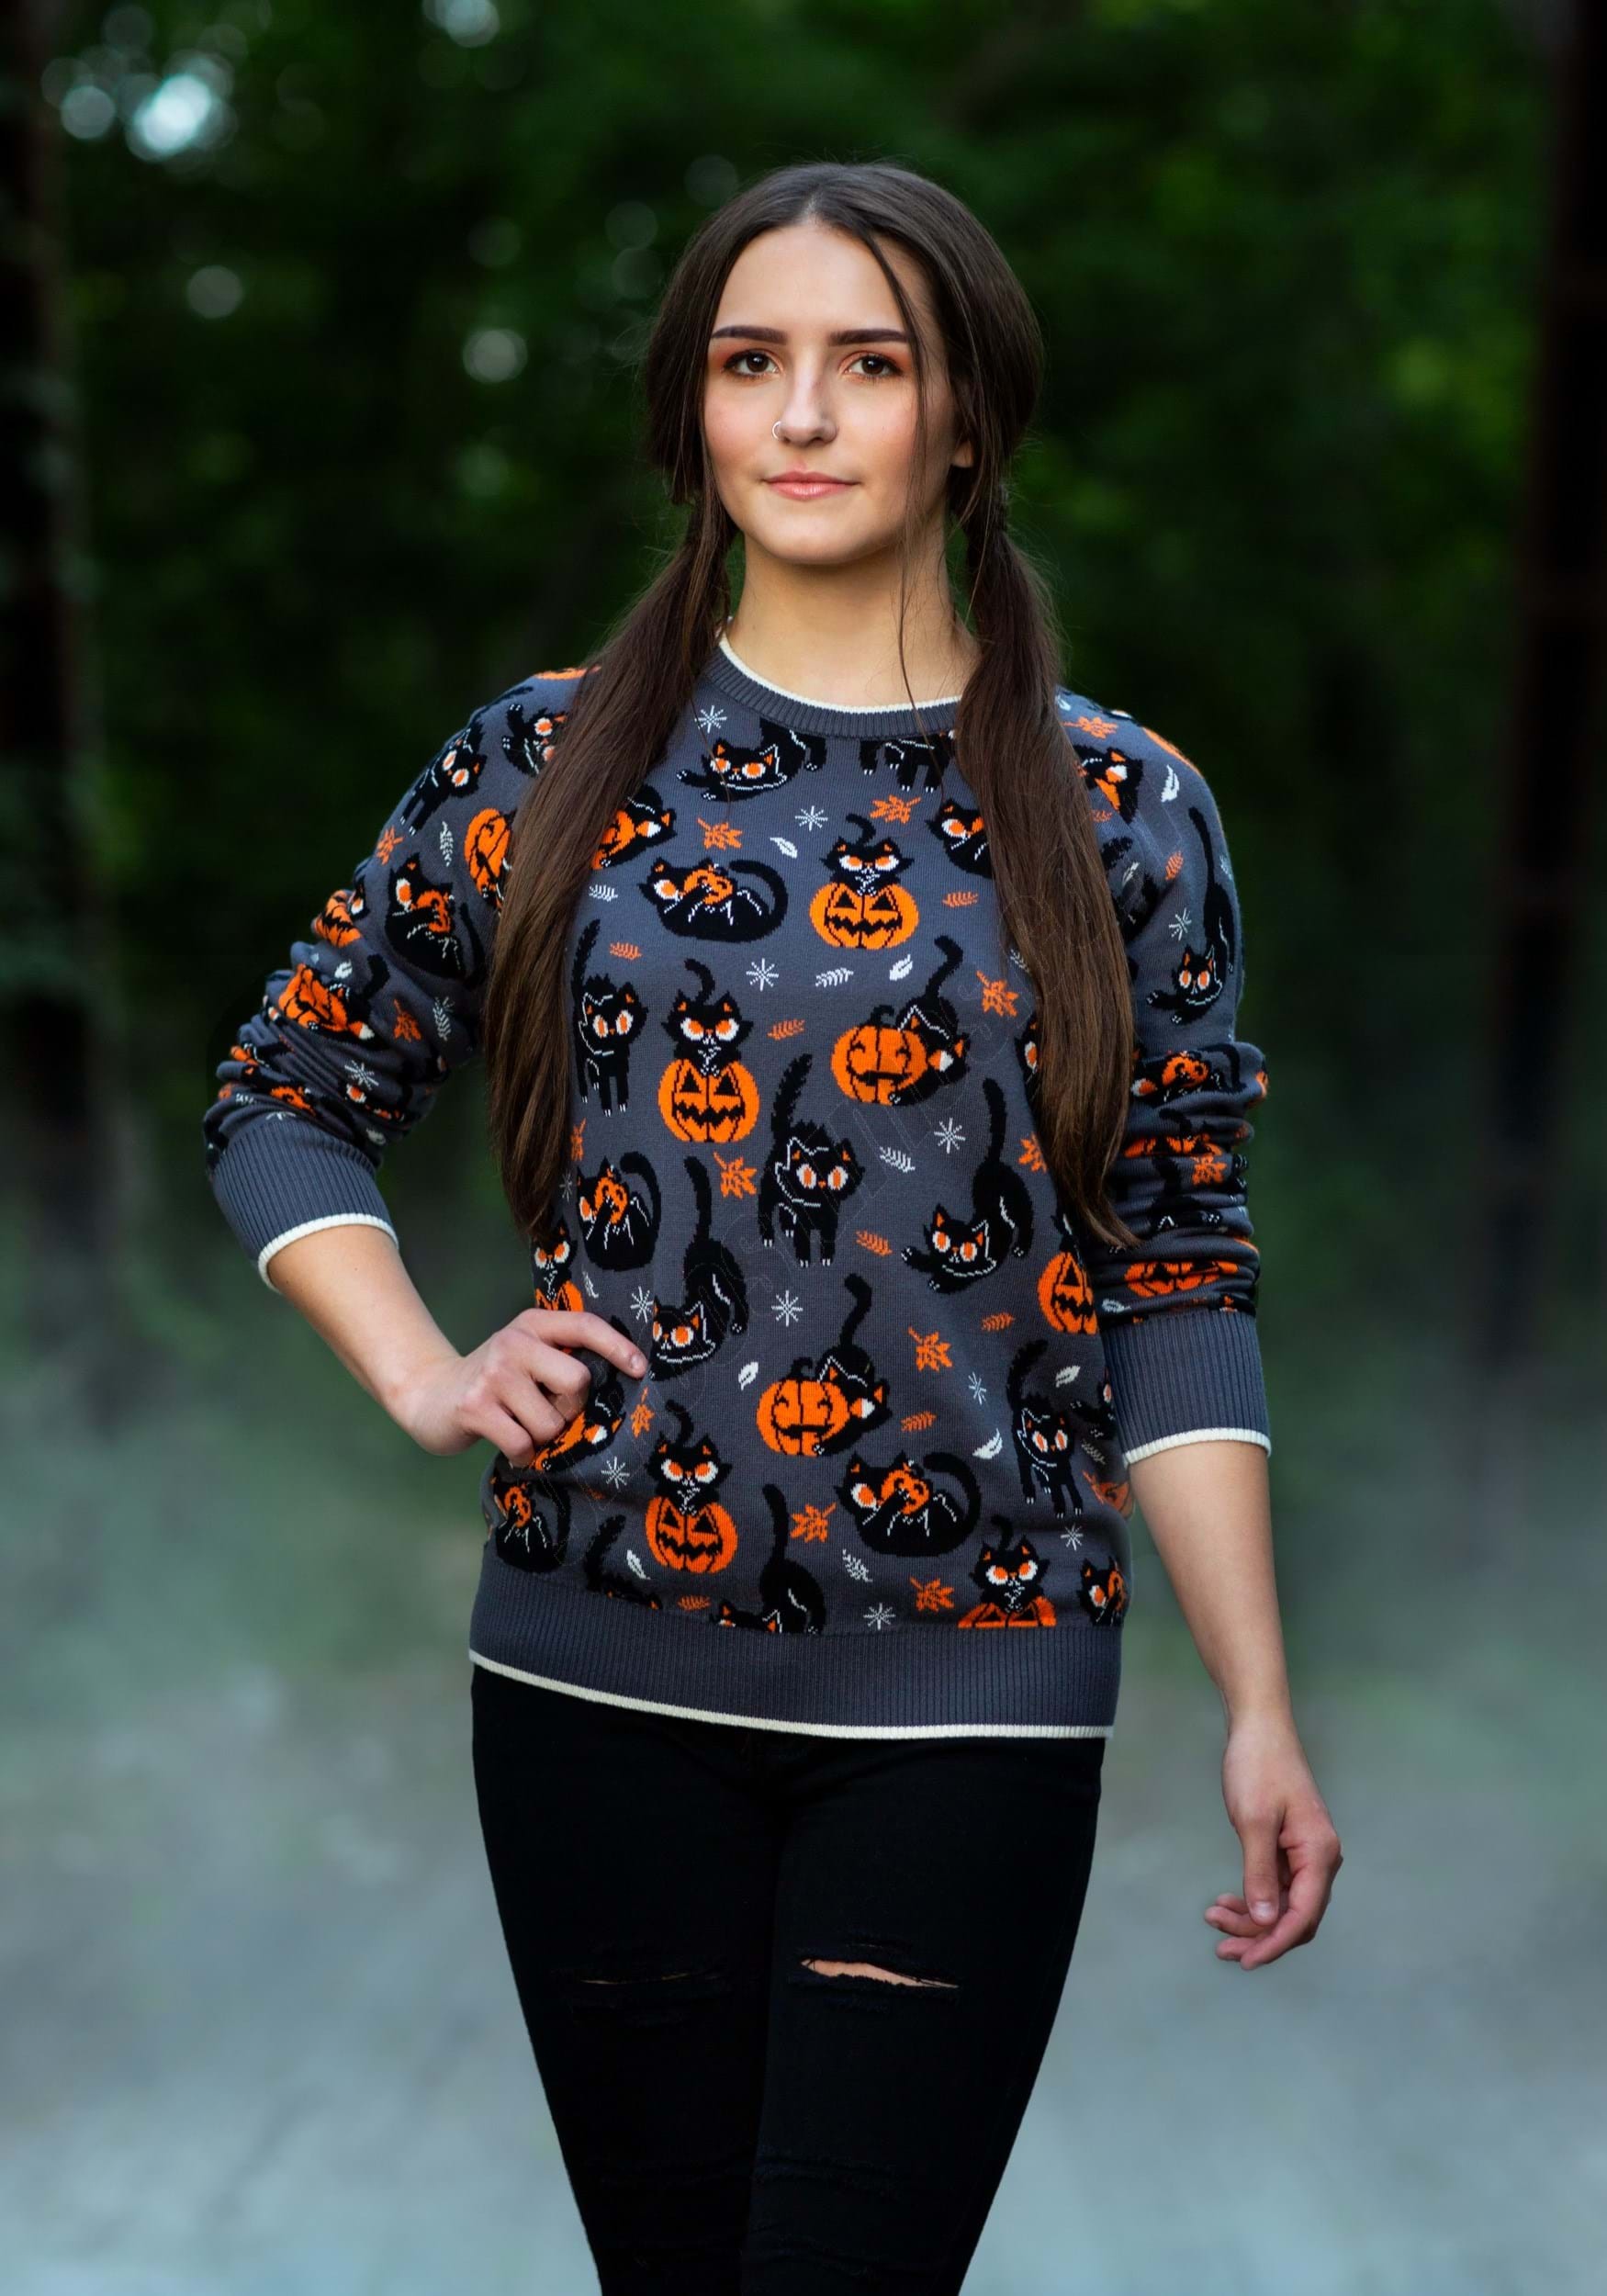 Adult Quirky Kitty Halloween Sweater Promotions - Adult Quirky Kitty Halloween Sweater Promotions